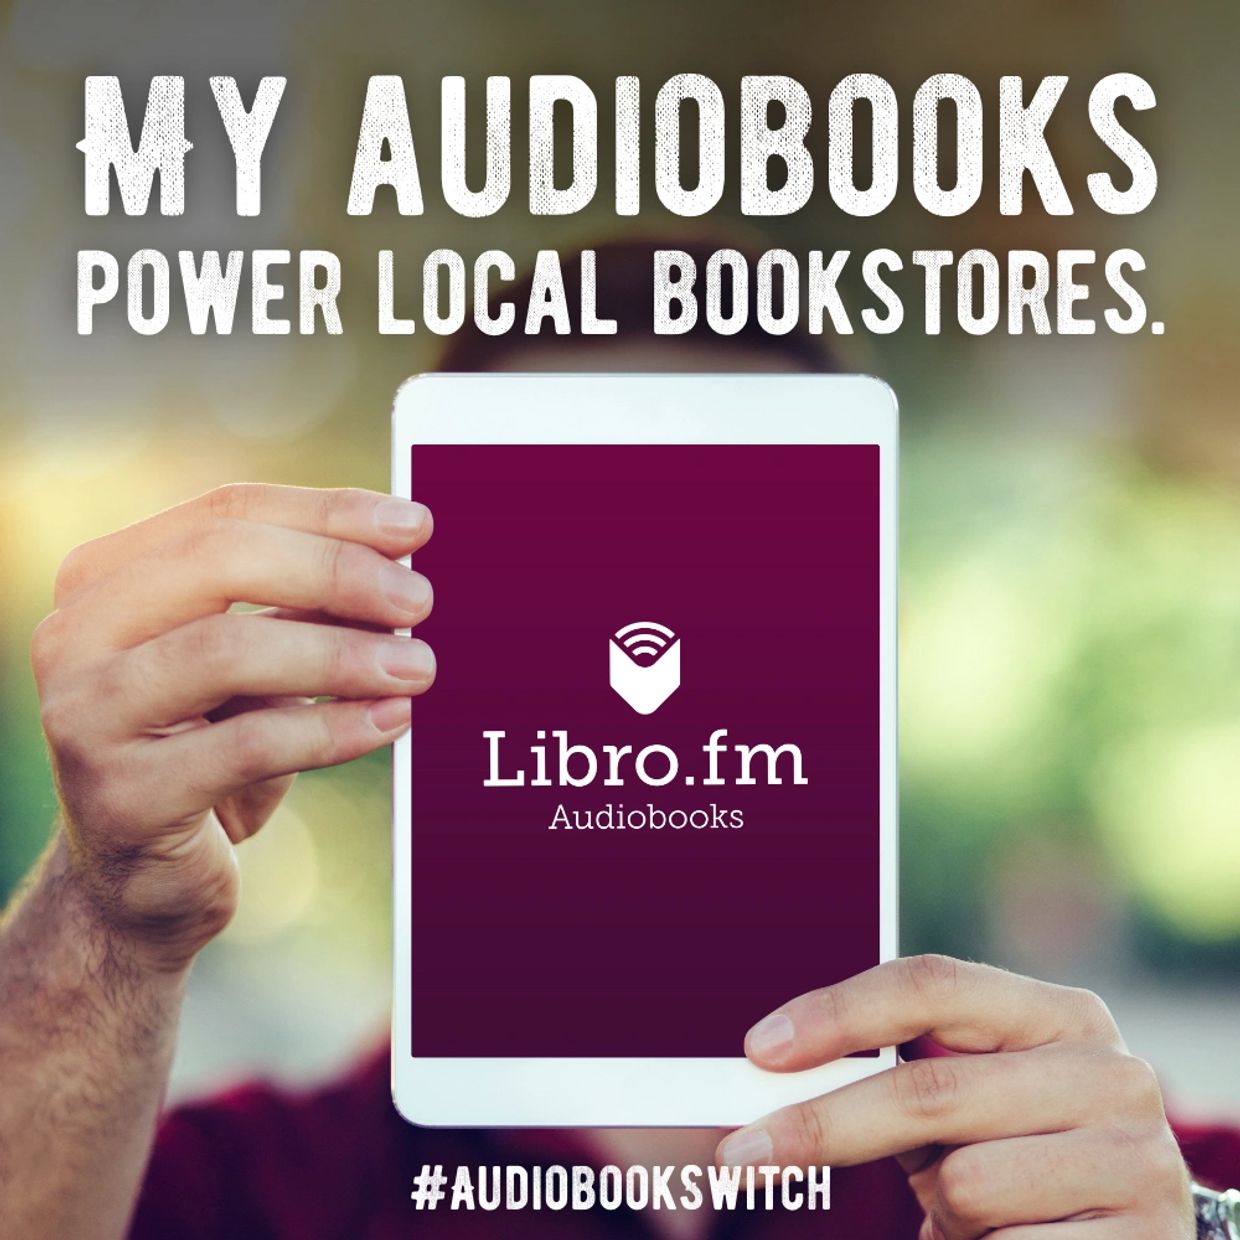  Find out about Libro.fm image